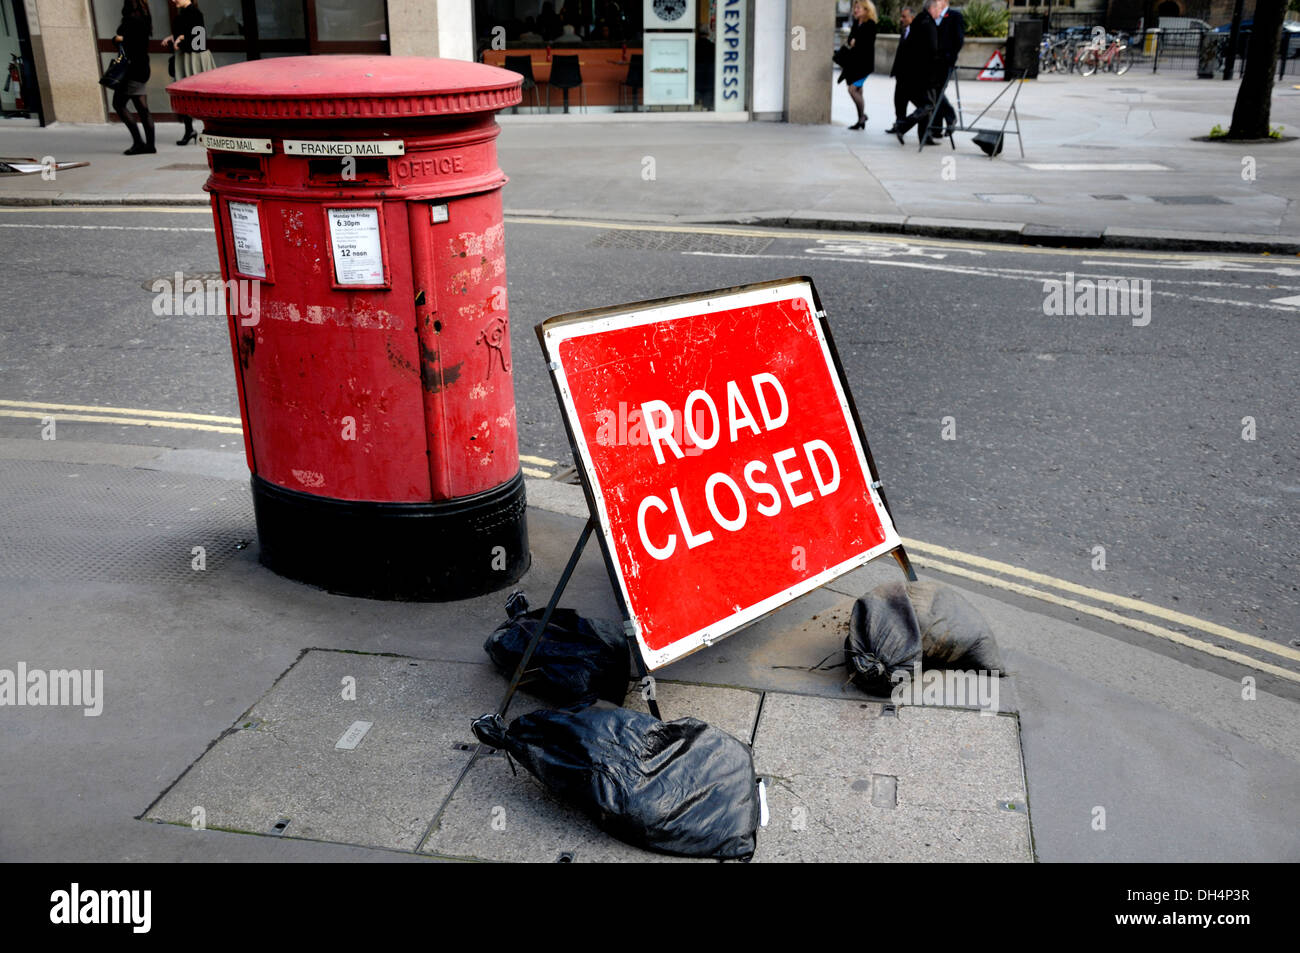 London, England, UK. Red letter box and Road Closed sign in the City Stock Photo